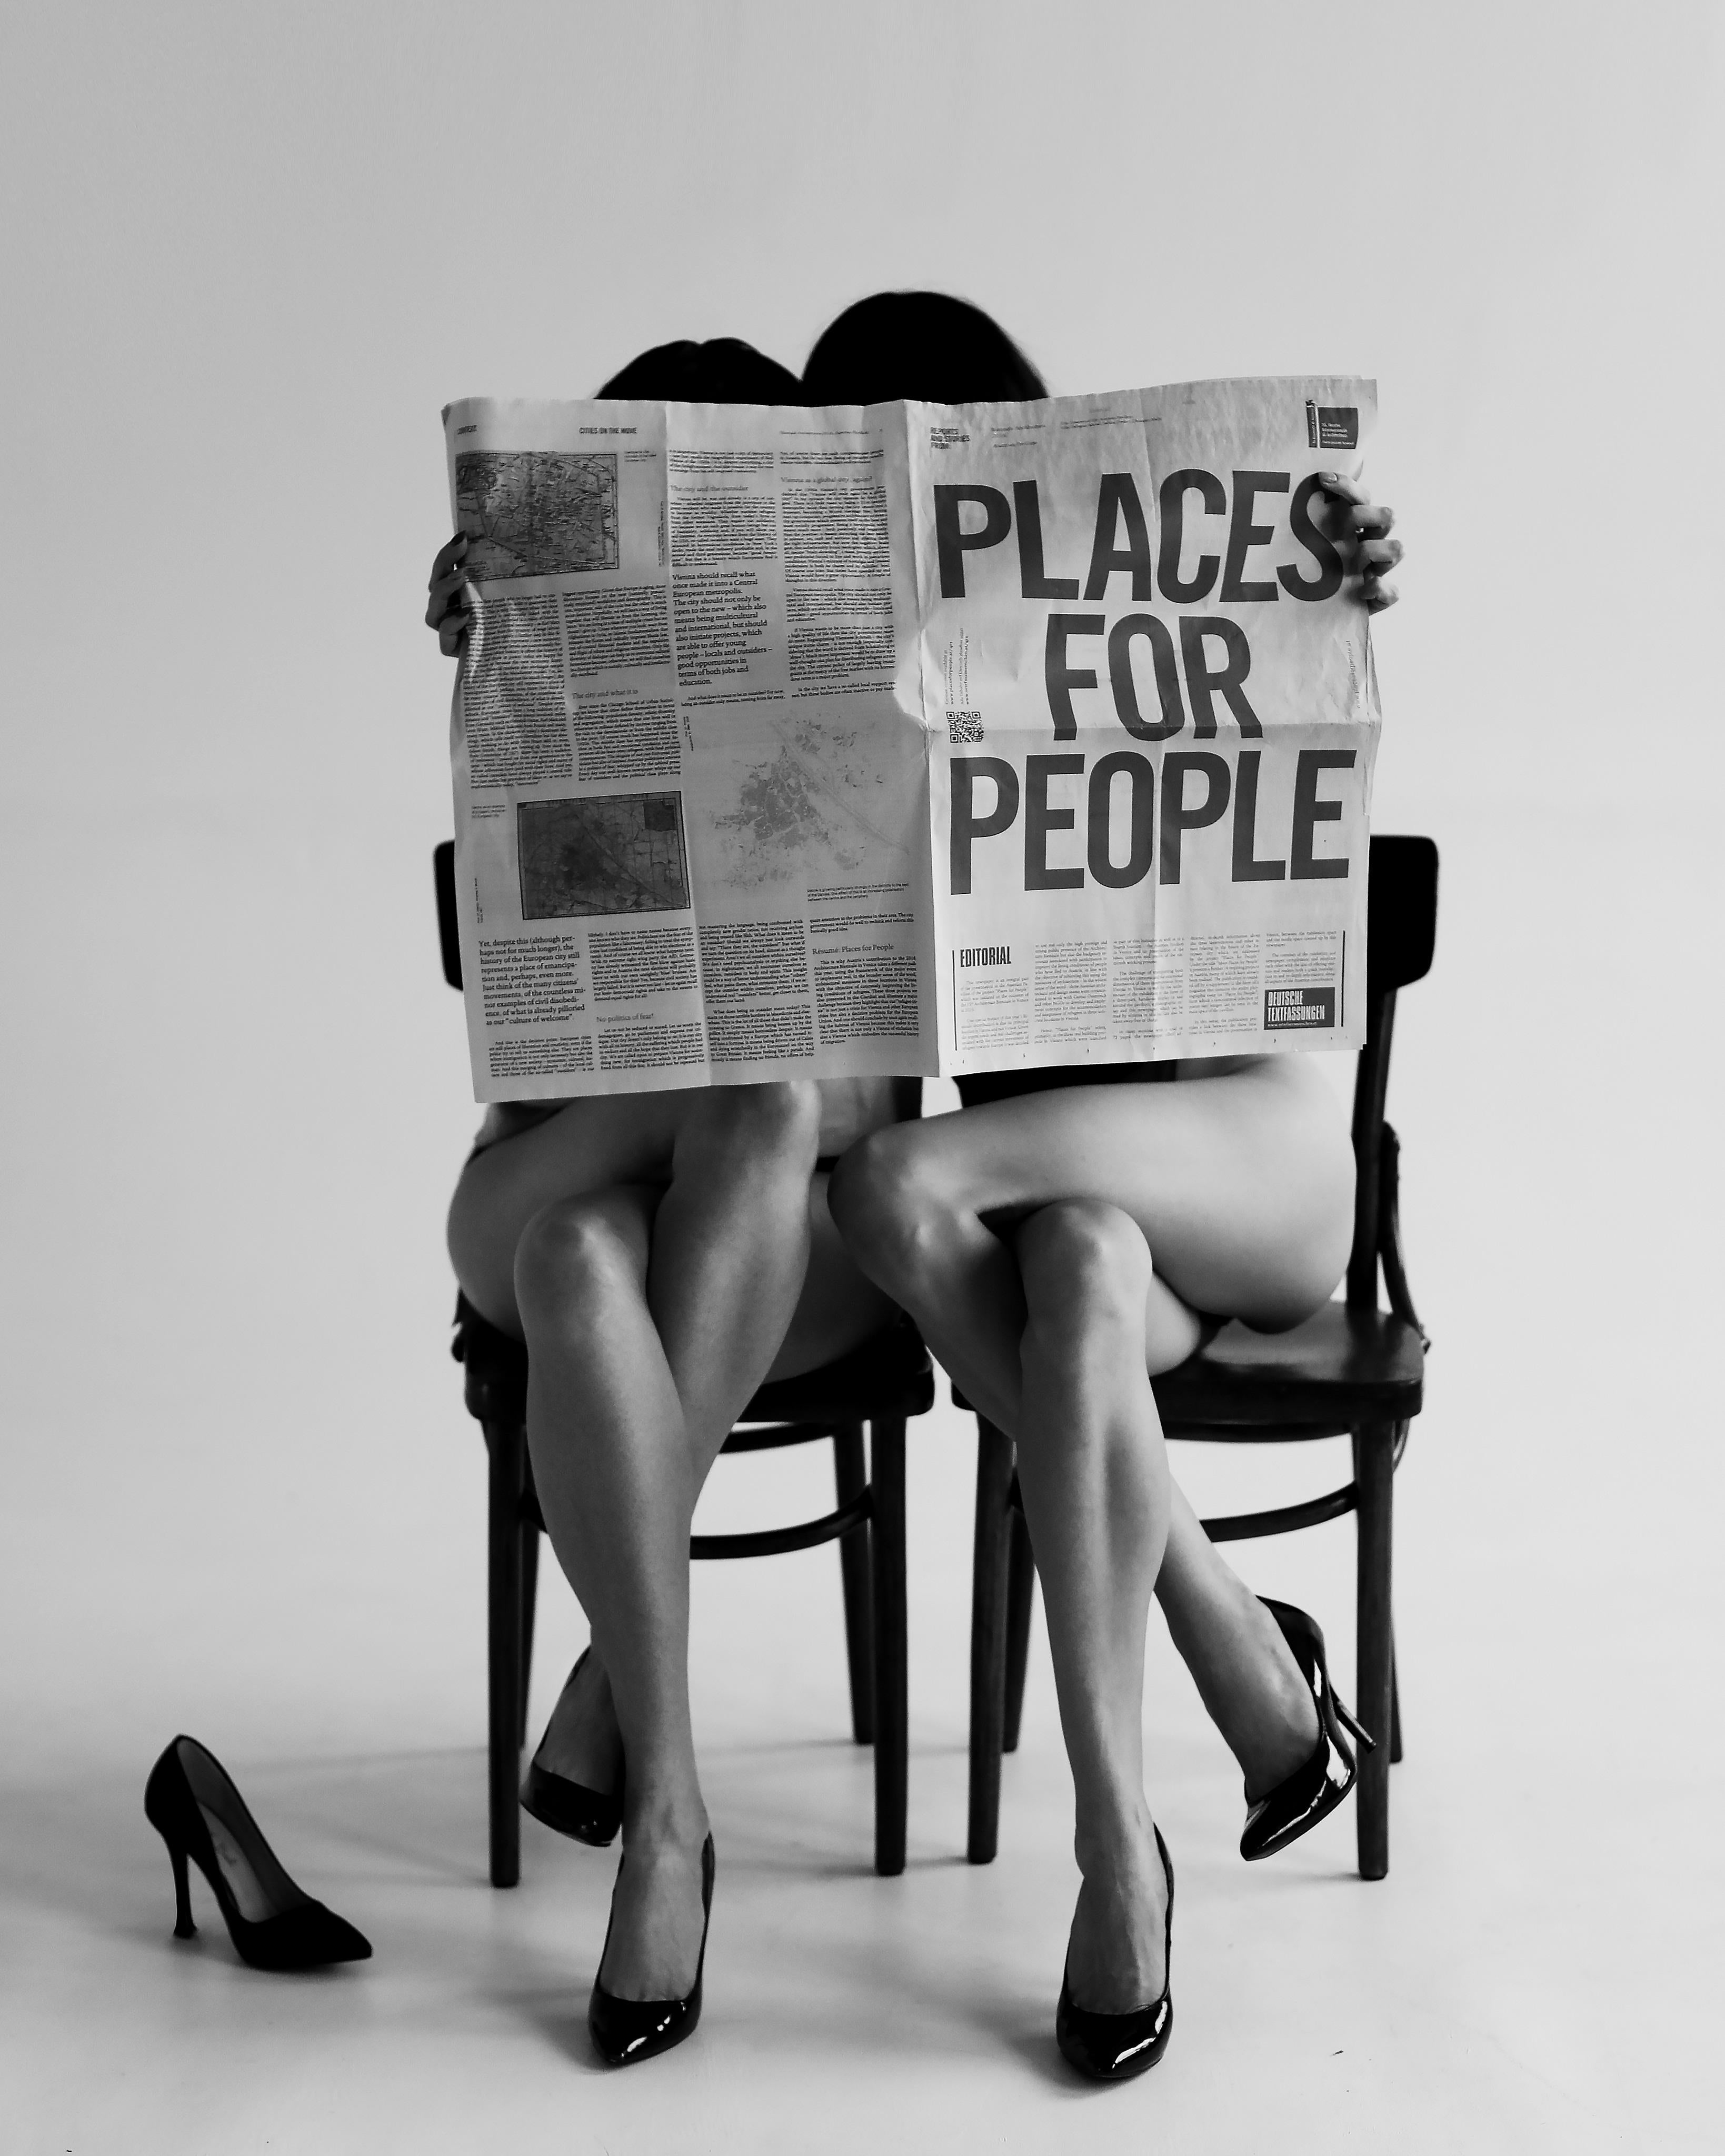 "Place for People" Photography 35" x 28" inch Edition of 7 by Olha Stepanian

Printed on Epson Professional Paper
Signed and numbered by the artist 

Not framed. Ships in a tube. 


Olha Stepanian was born and raised in Ukraine, where she currently